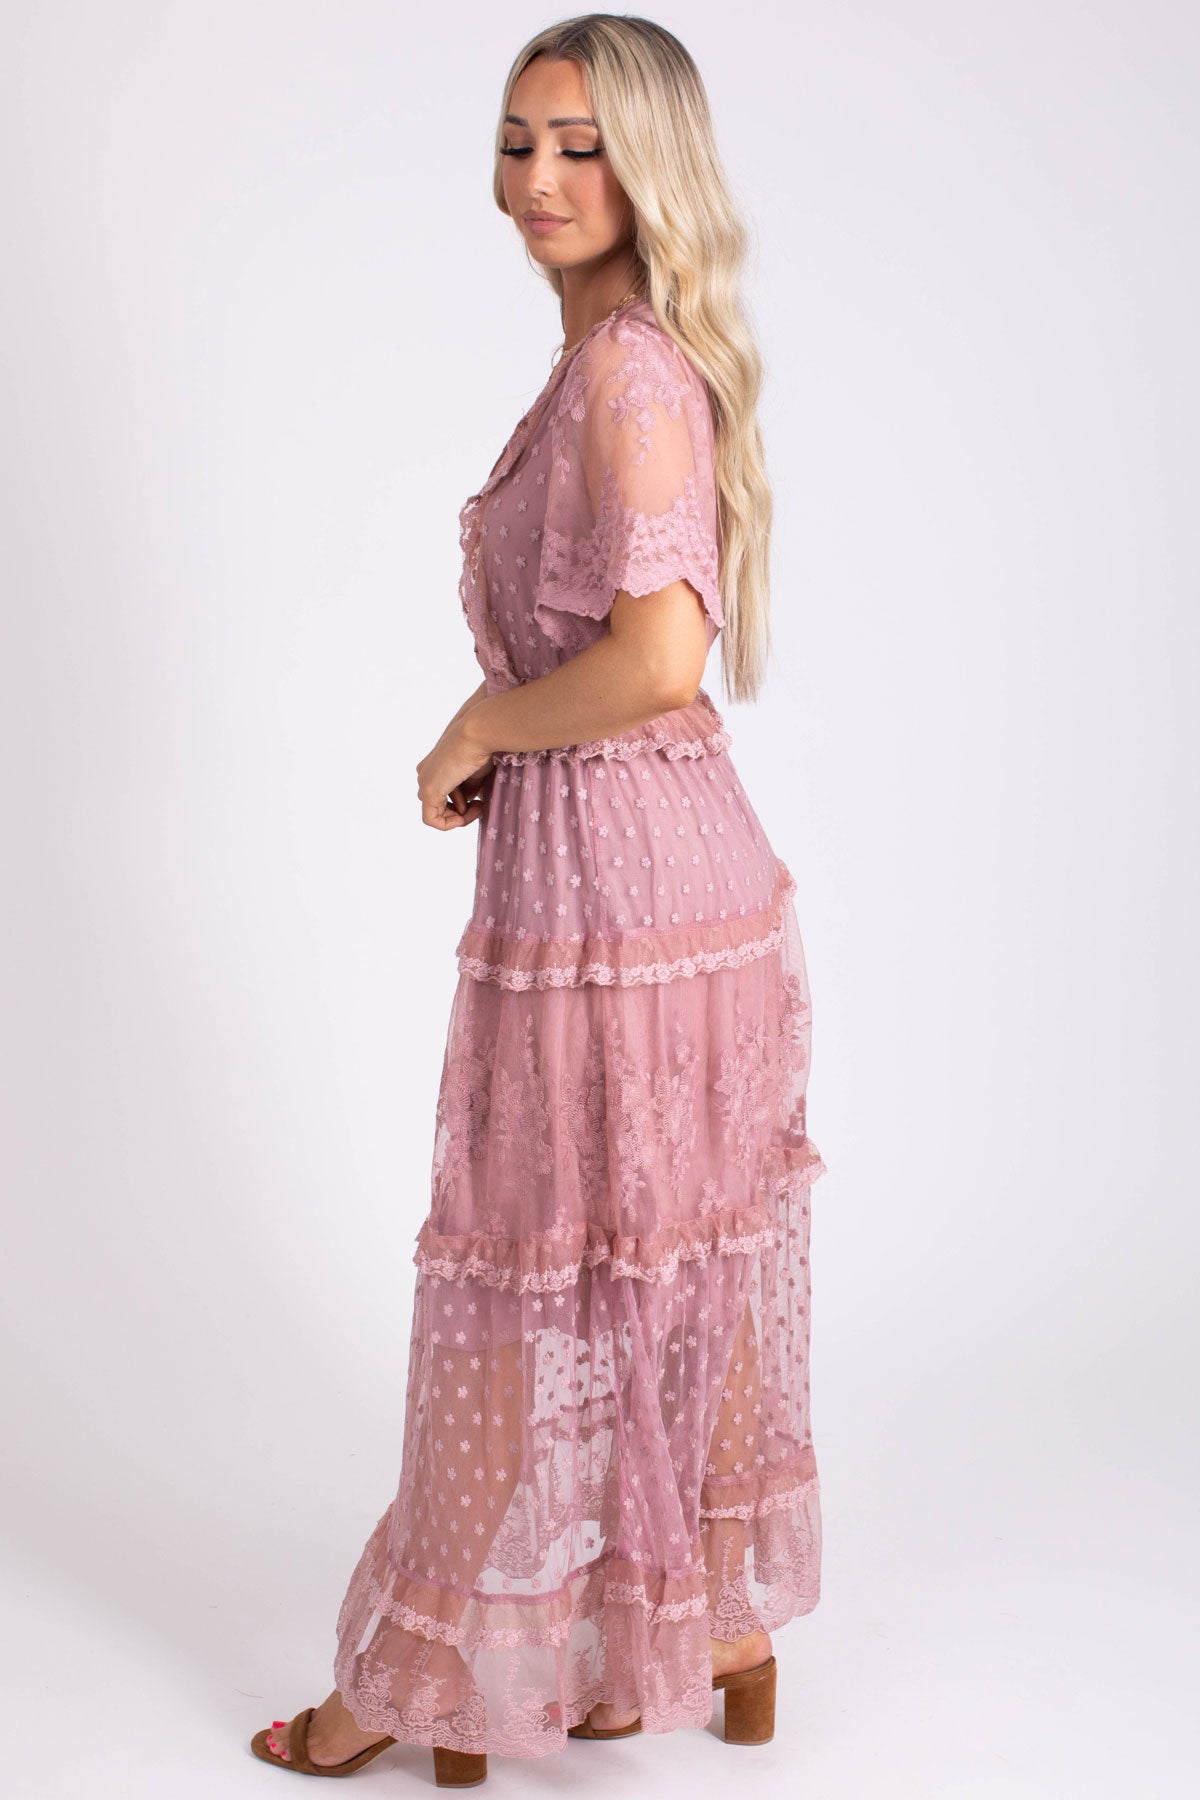 Lace Maxi Dress for Spring Summer